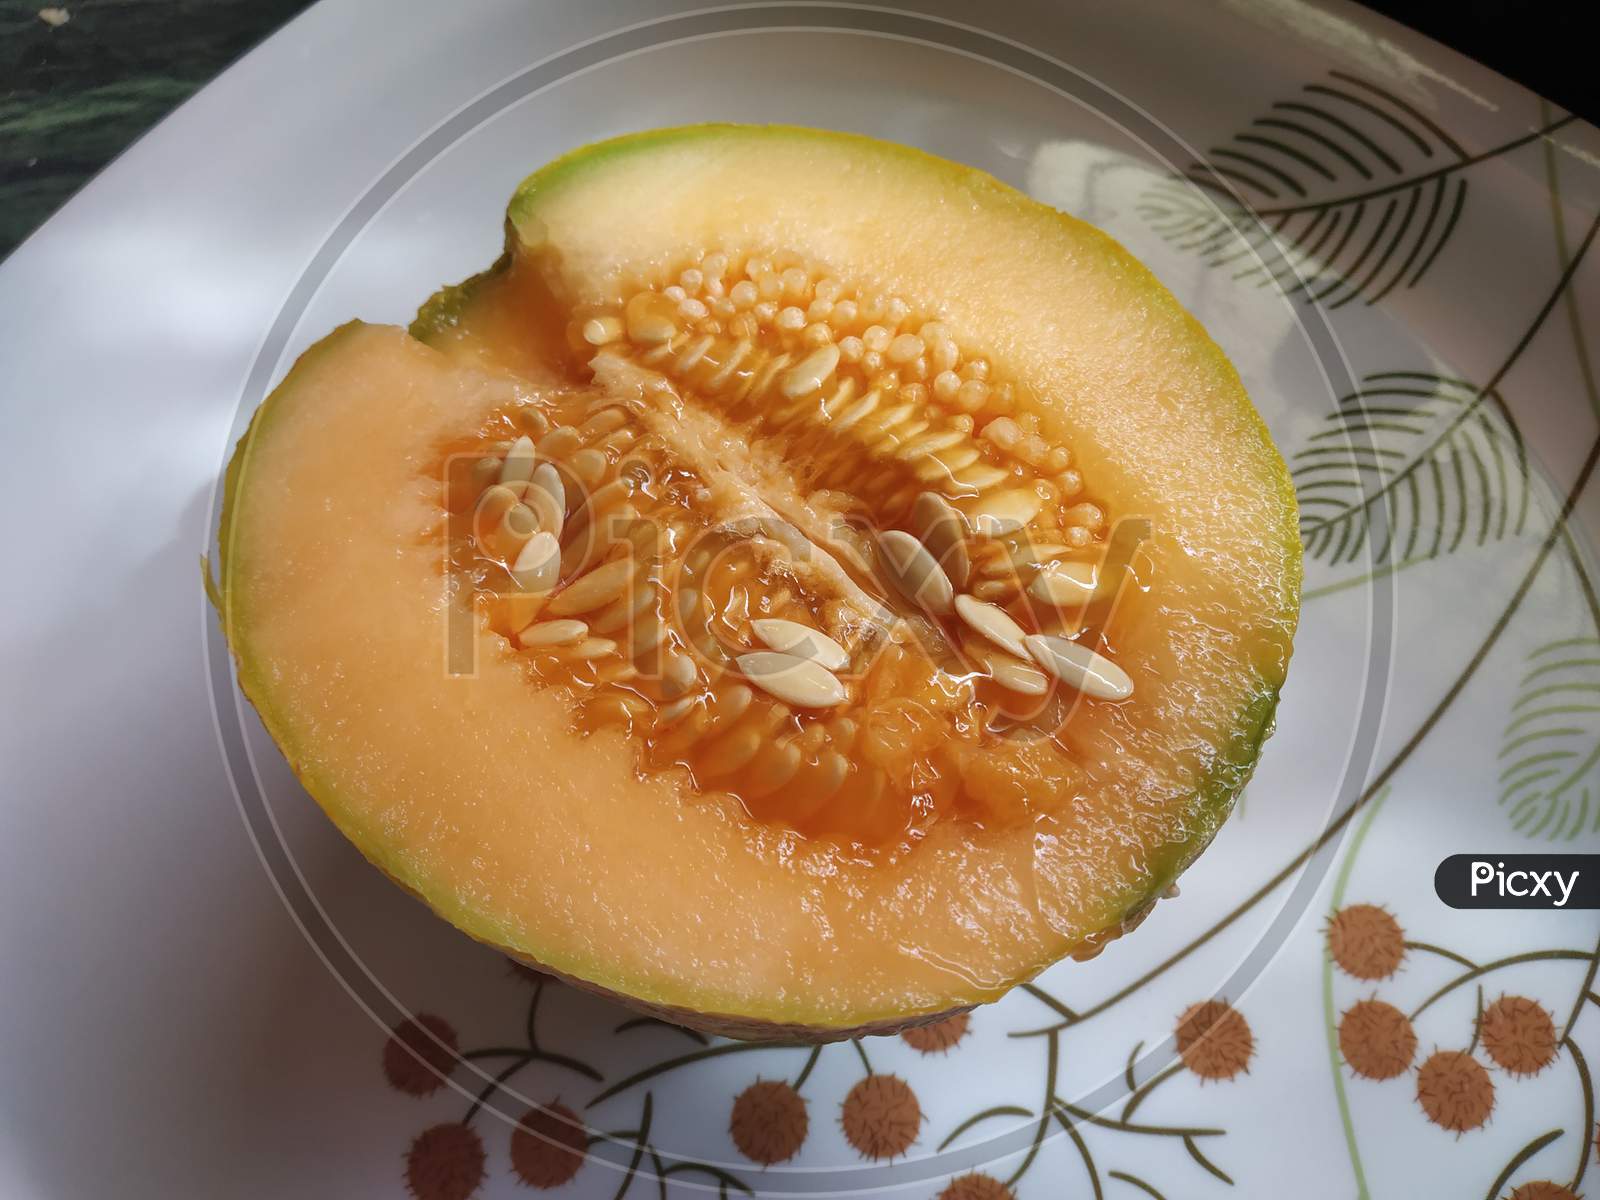 Top view of fresh juicy melon with seeds